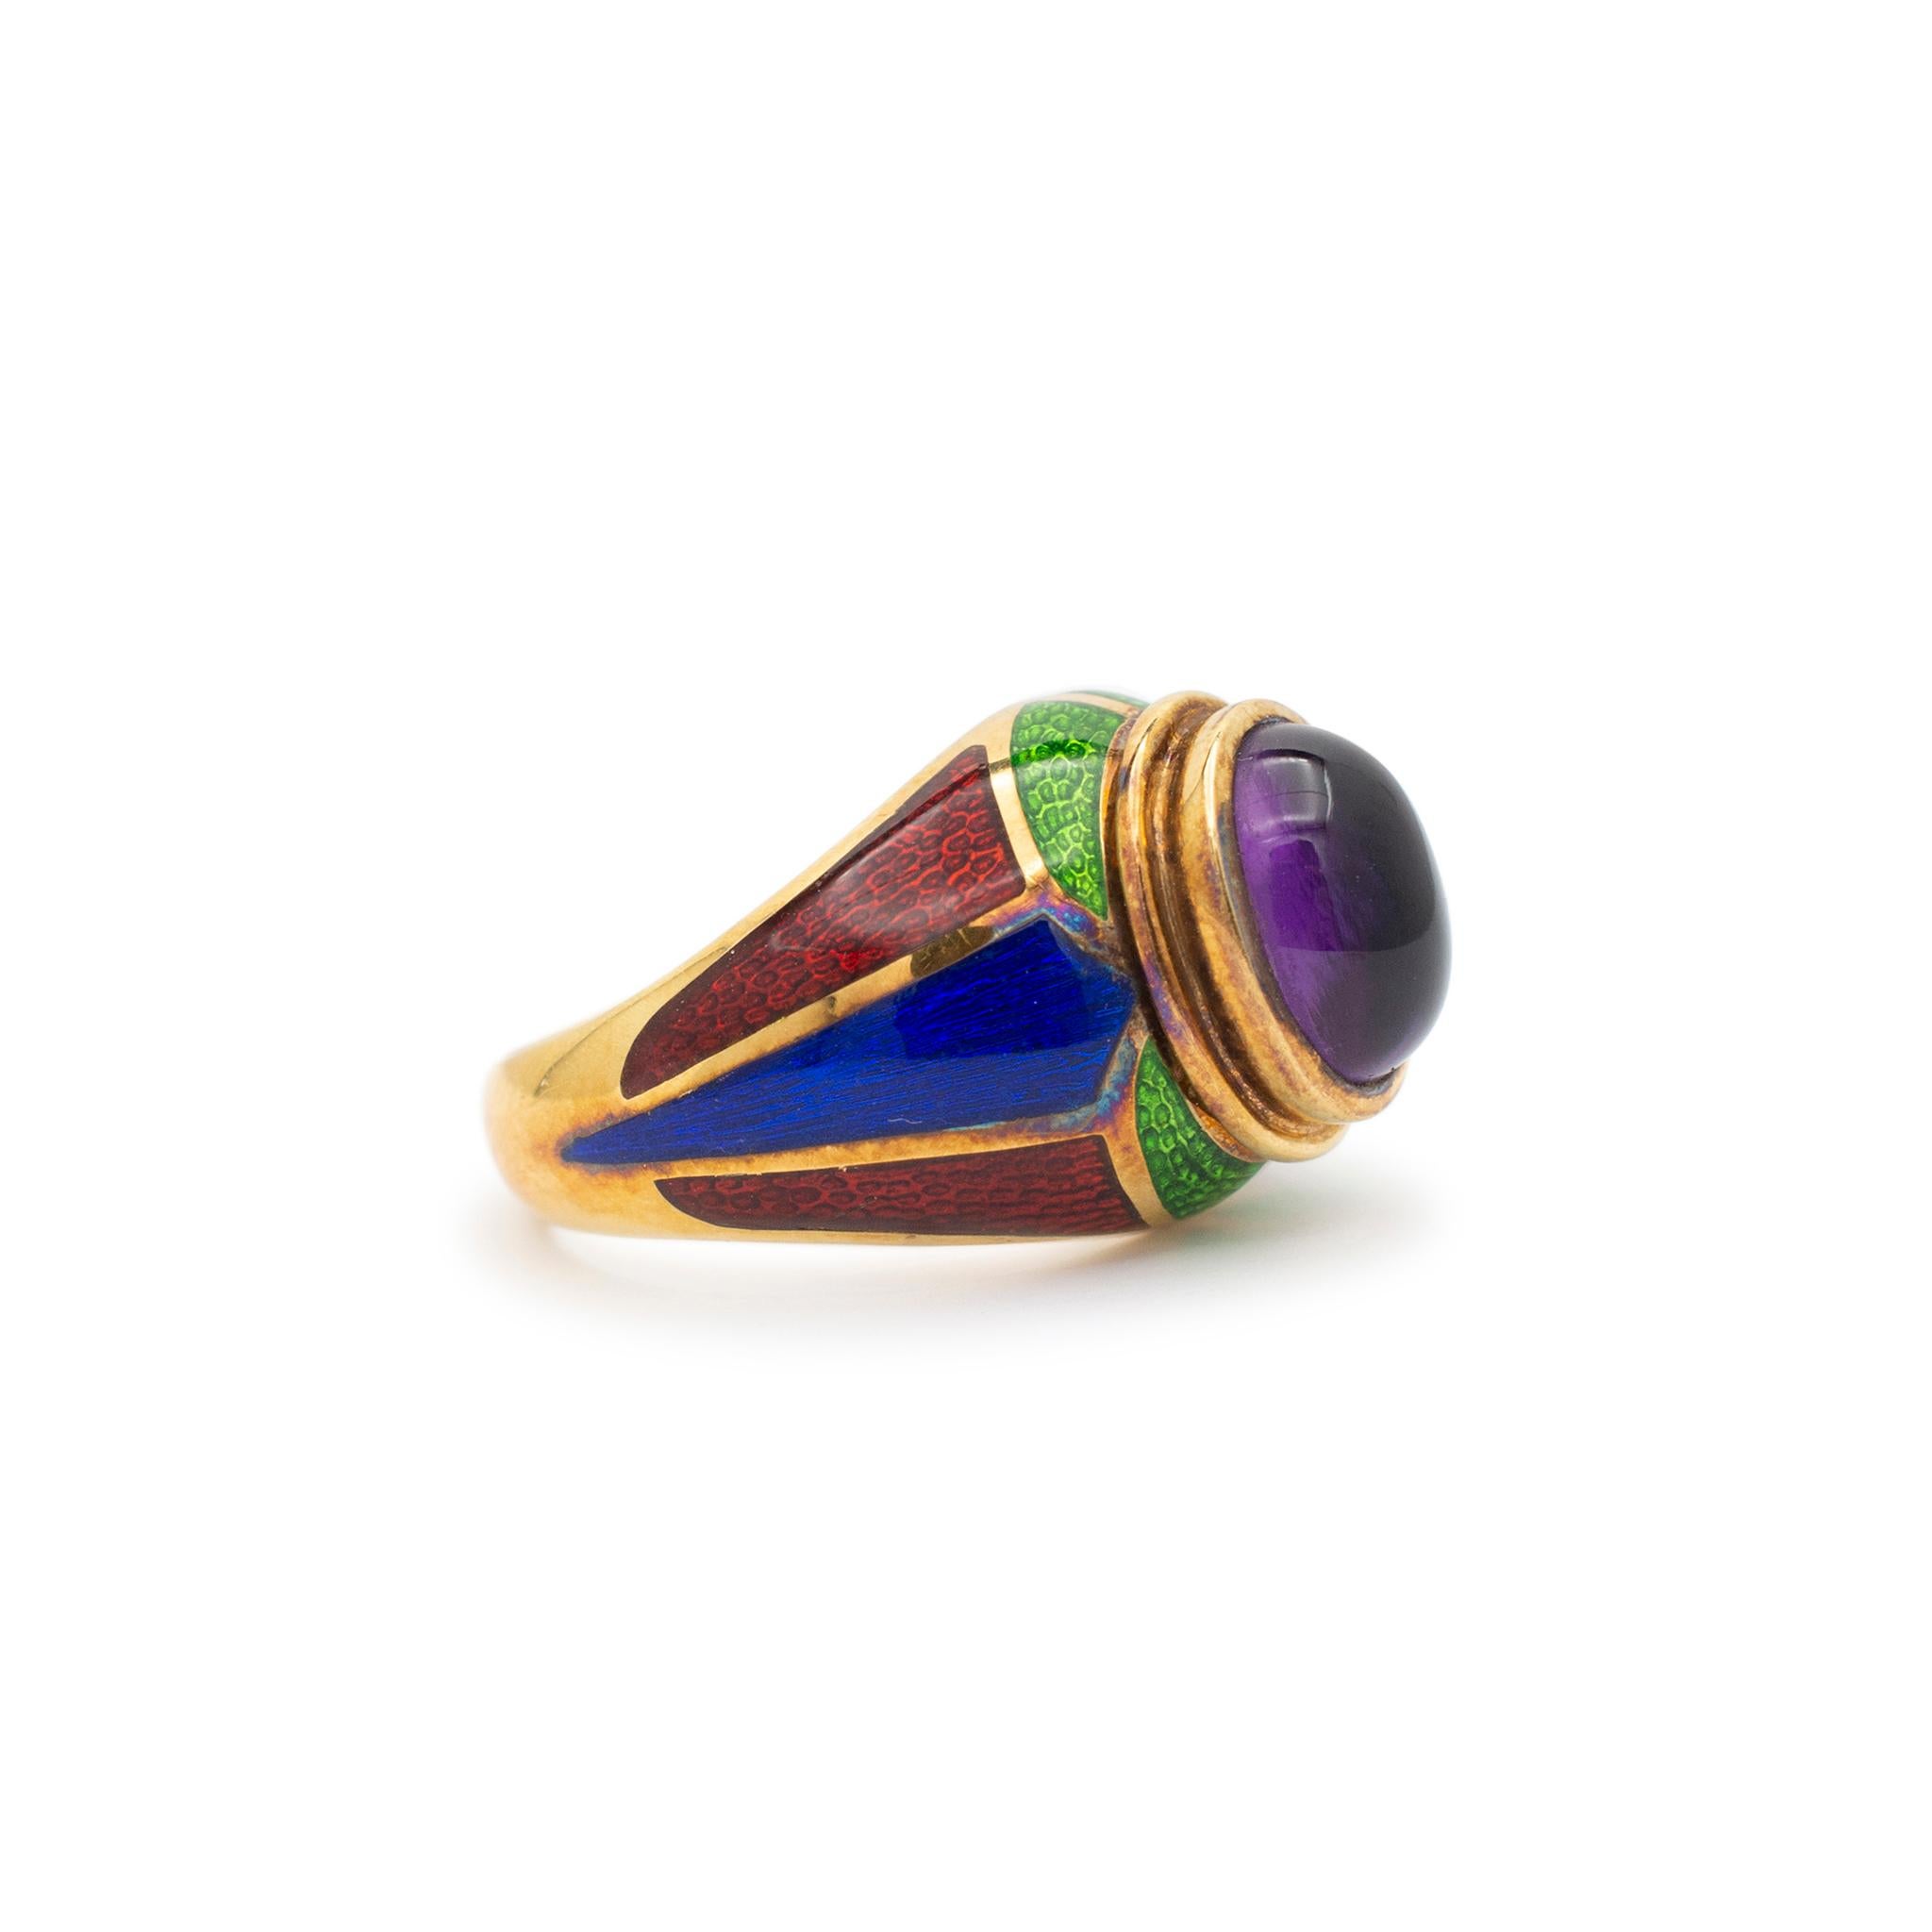 Cabochon Vintage Mavito New York 18K Yellow Gold Amethyst Blue Green Enamel Cocktail Ring For Sale